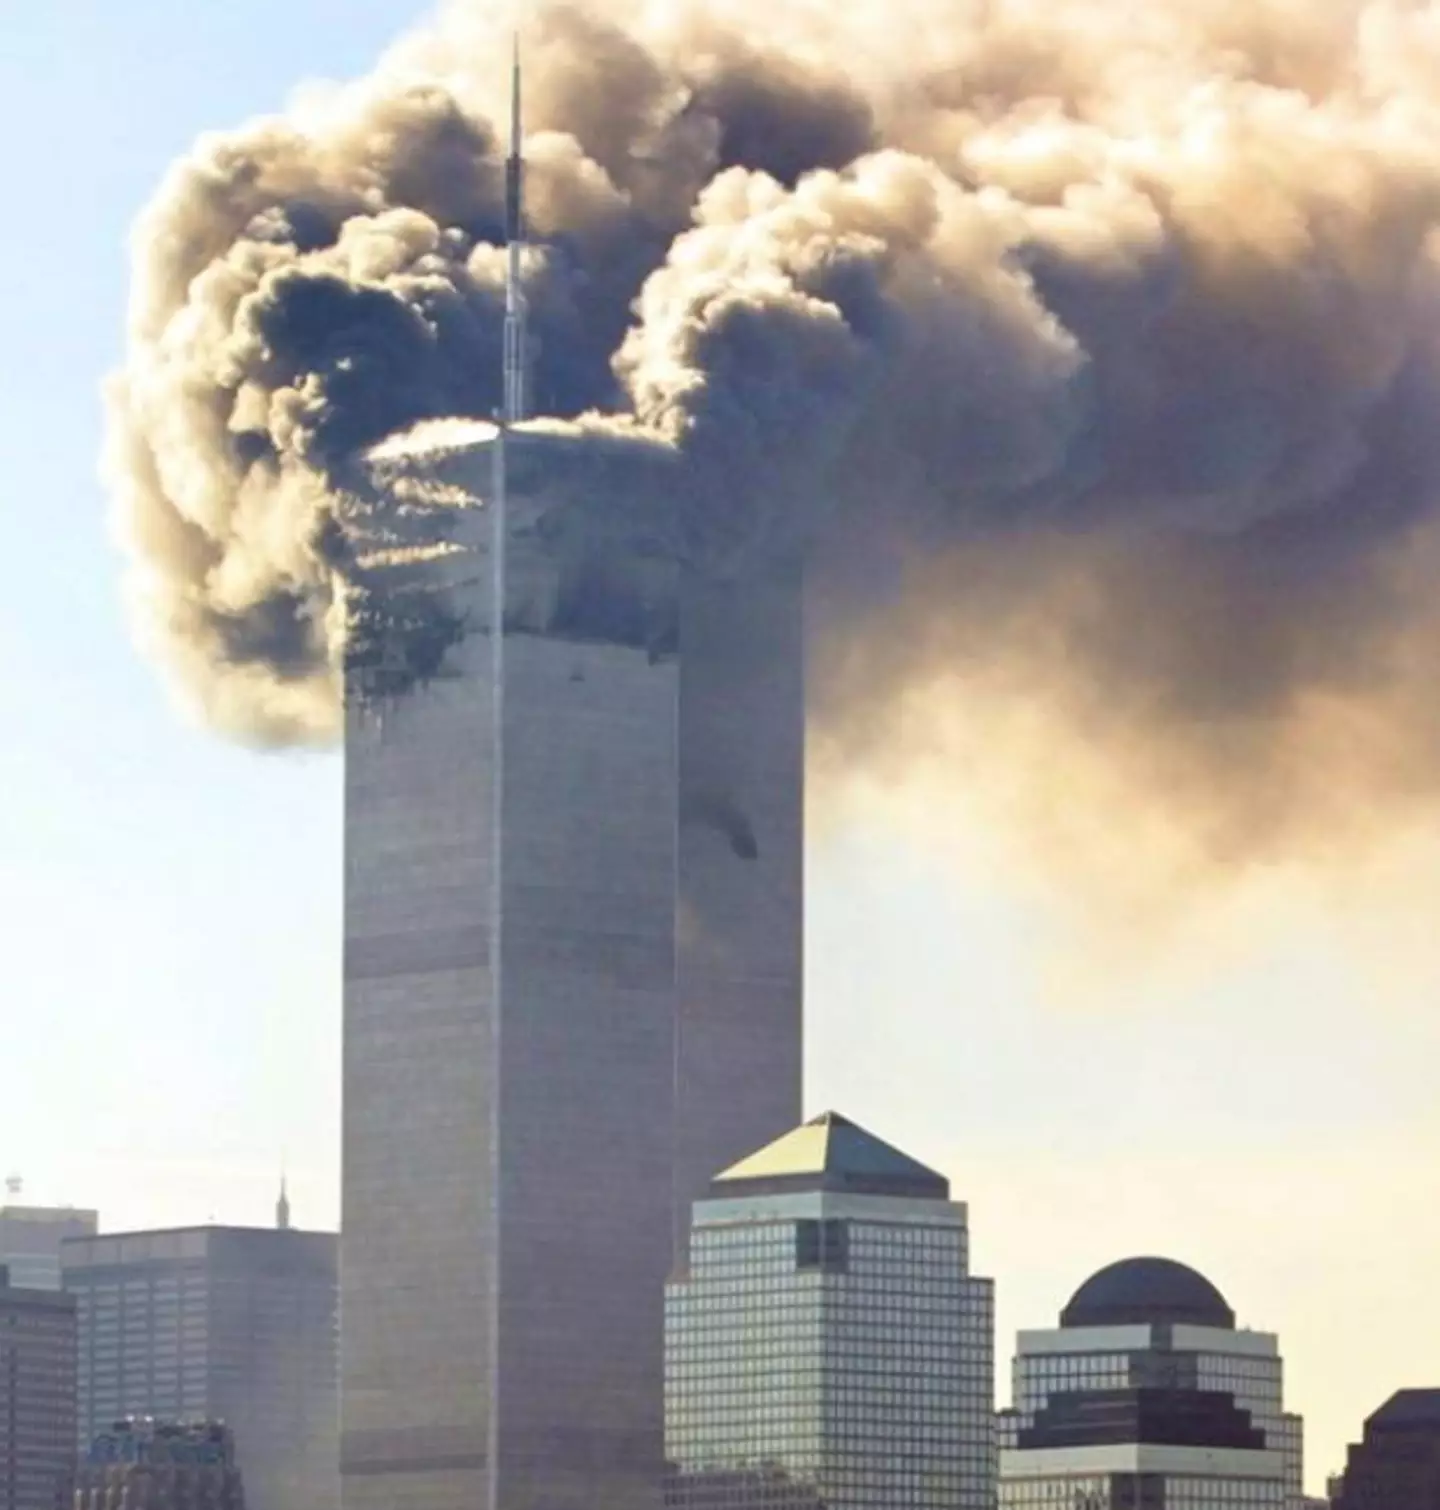 The Twin Towers were hit by a commercial airliner (